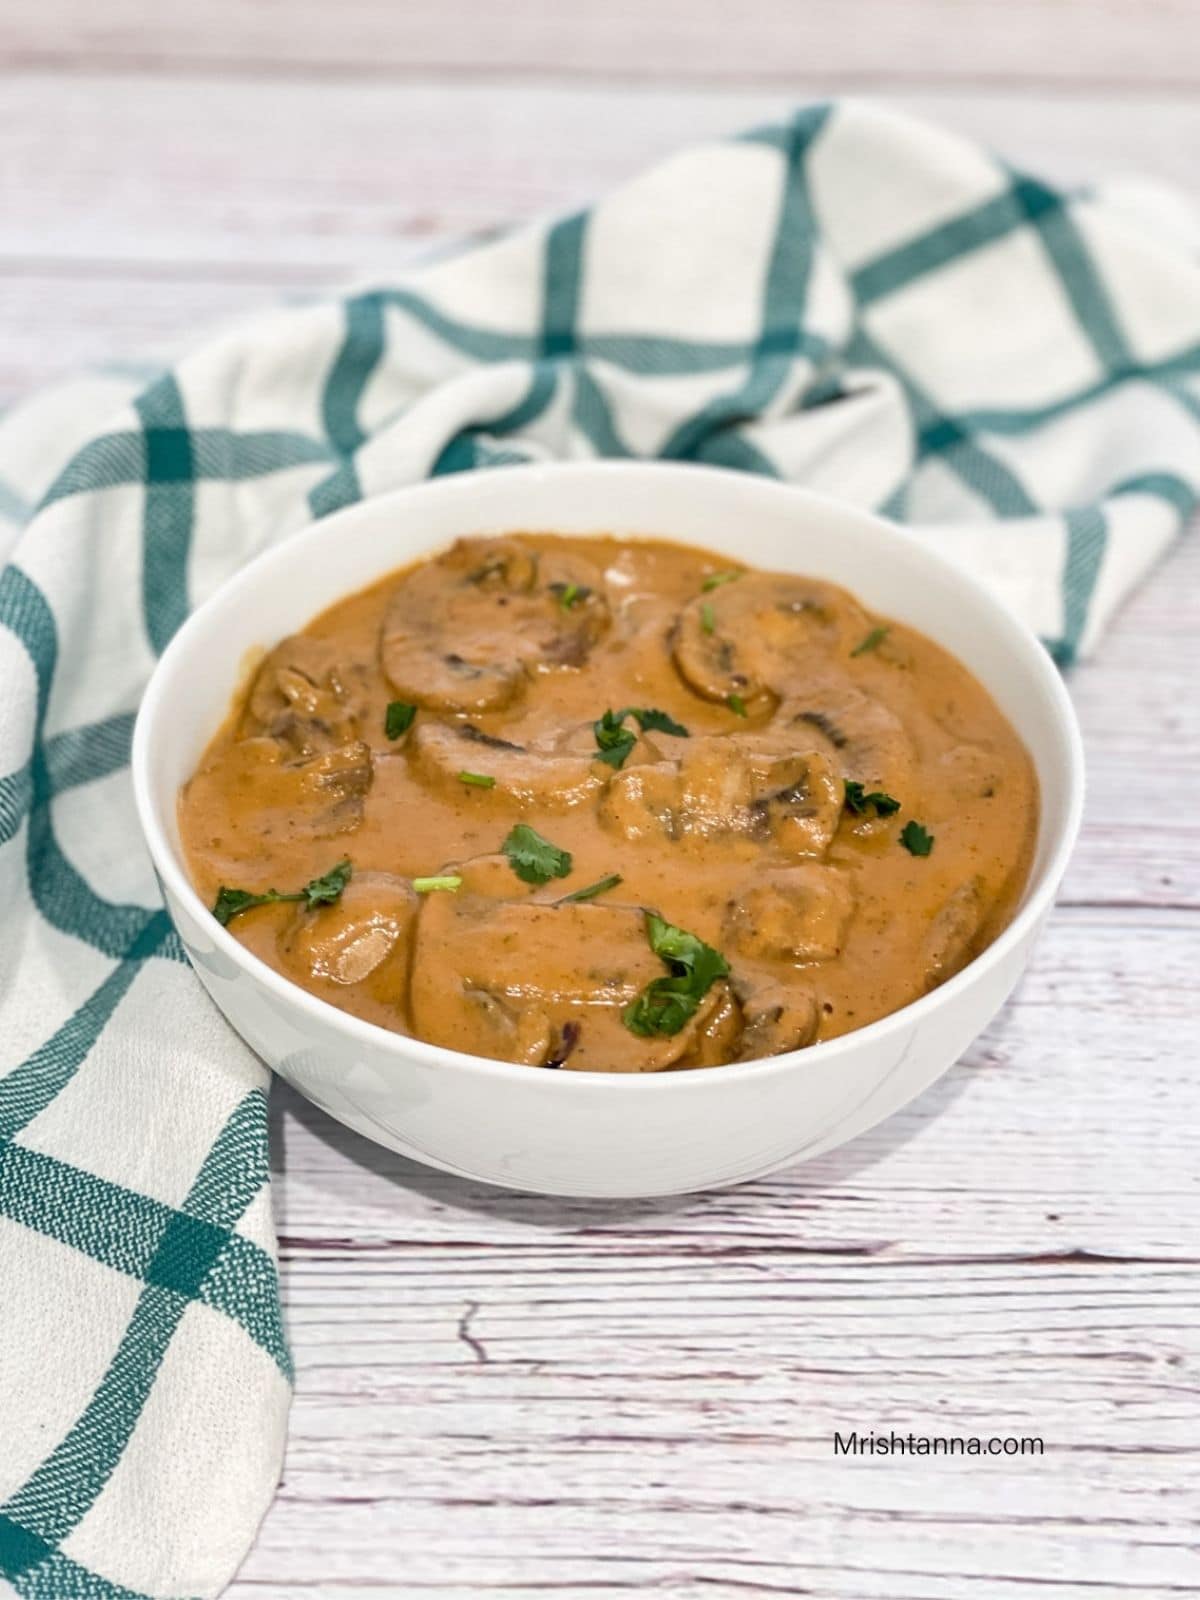 A bowl of mushroom masala is on the table.